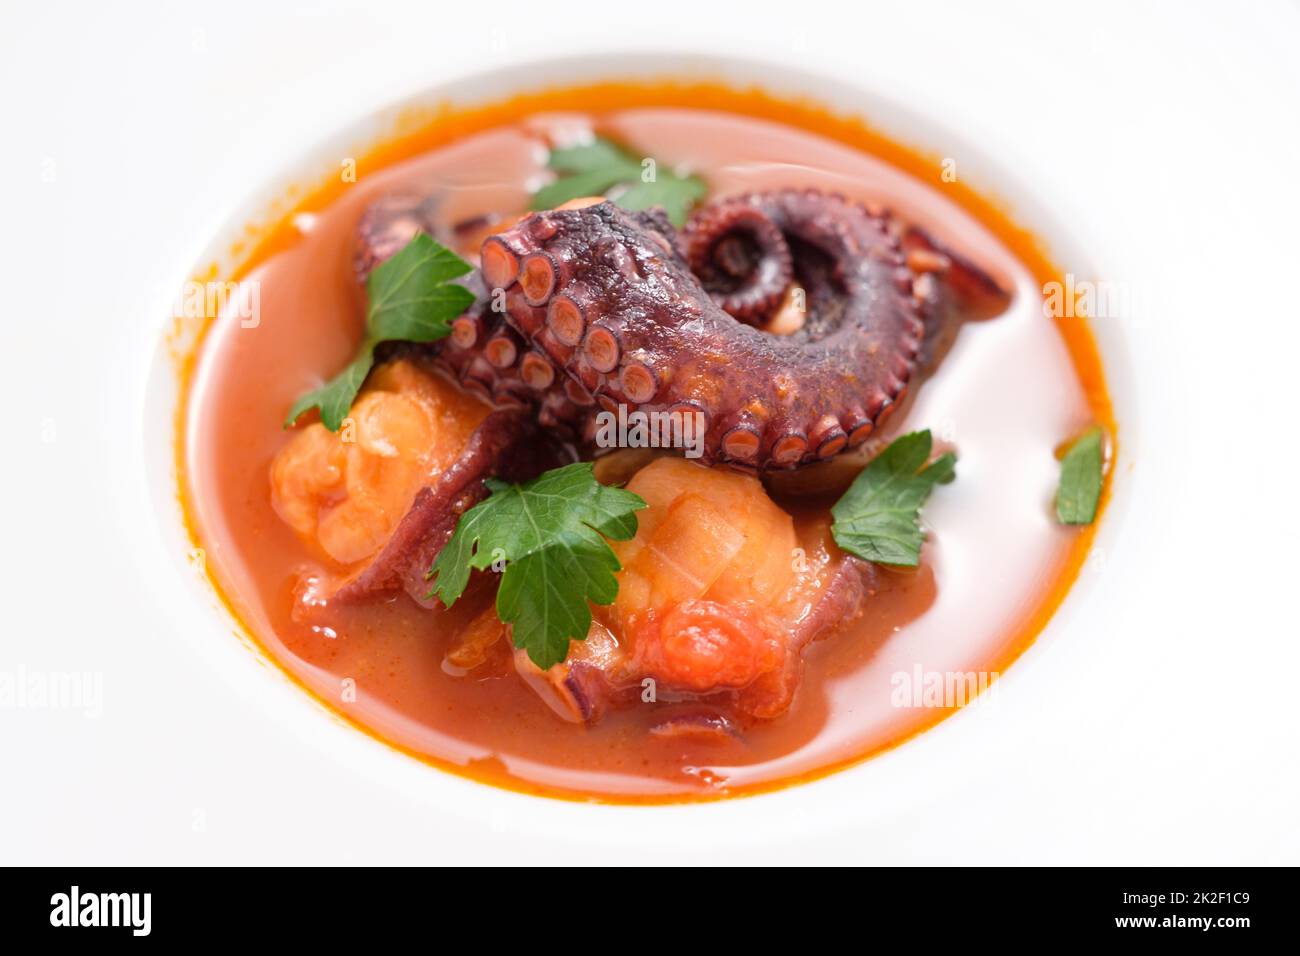 Octopus arm in tomato sauce with parsley from above Stock Photo